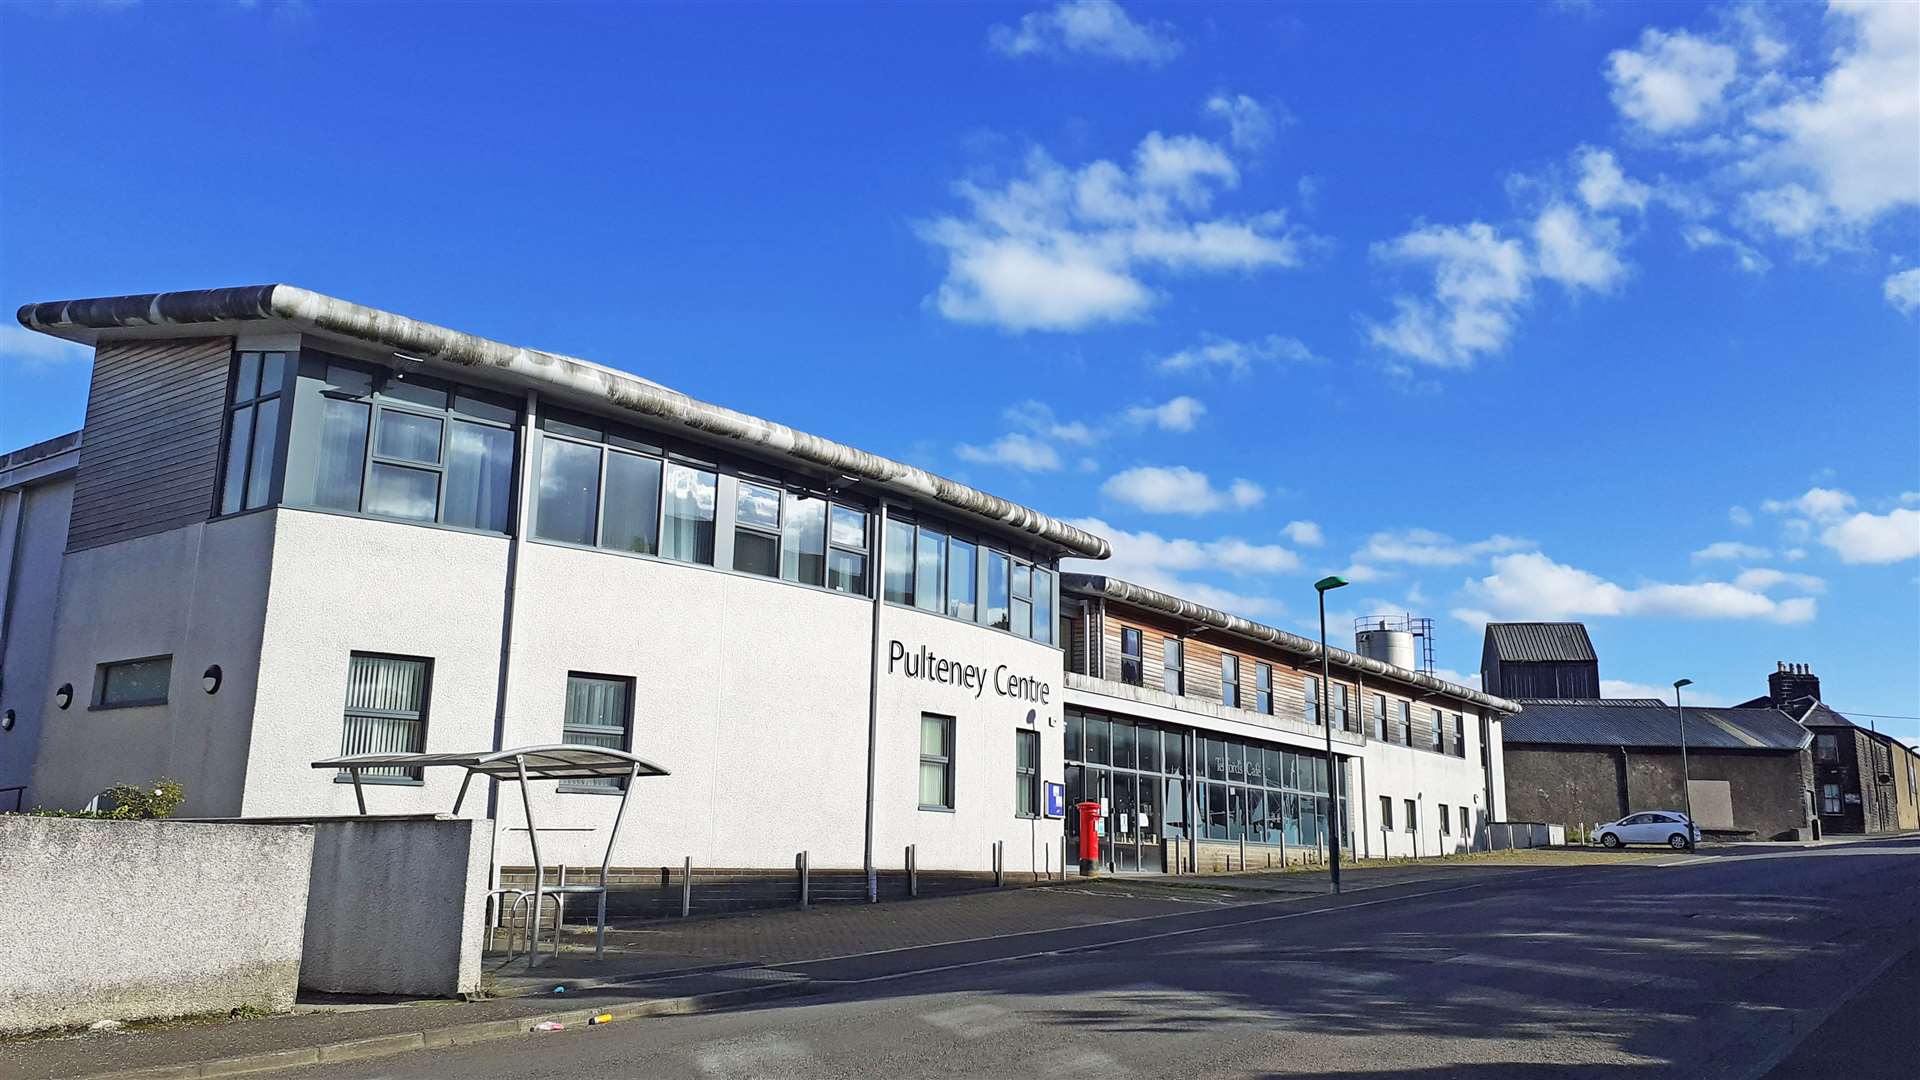 The daycare facility is located at the PPP Pulteney Centre in Huddart Street, Wick.